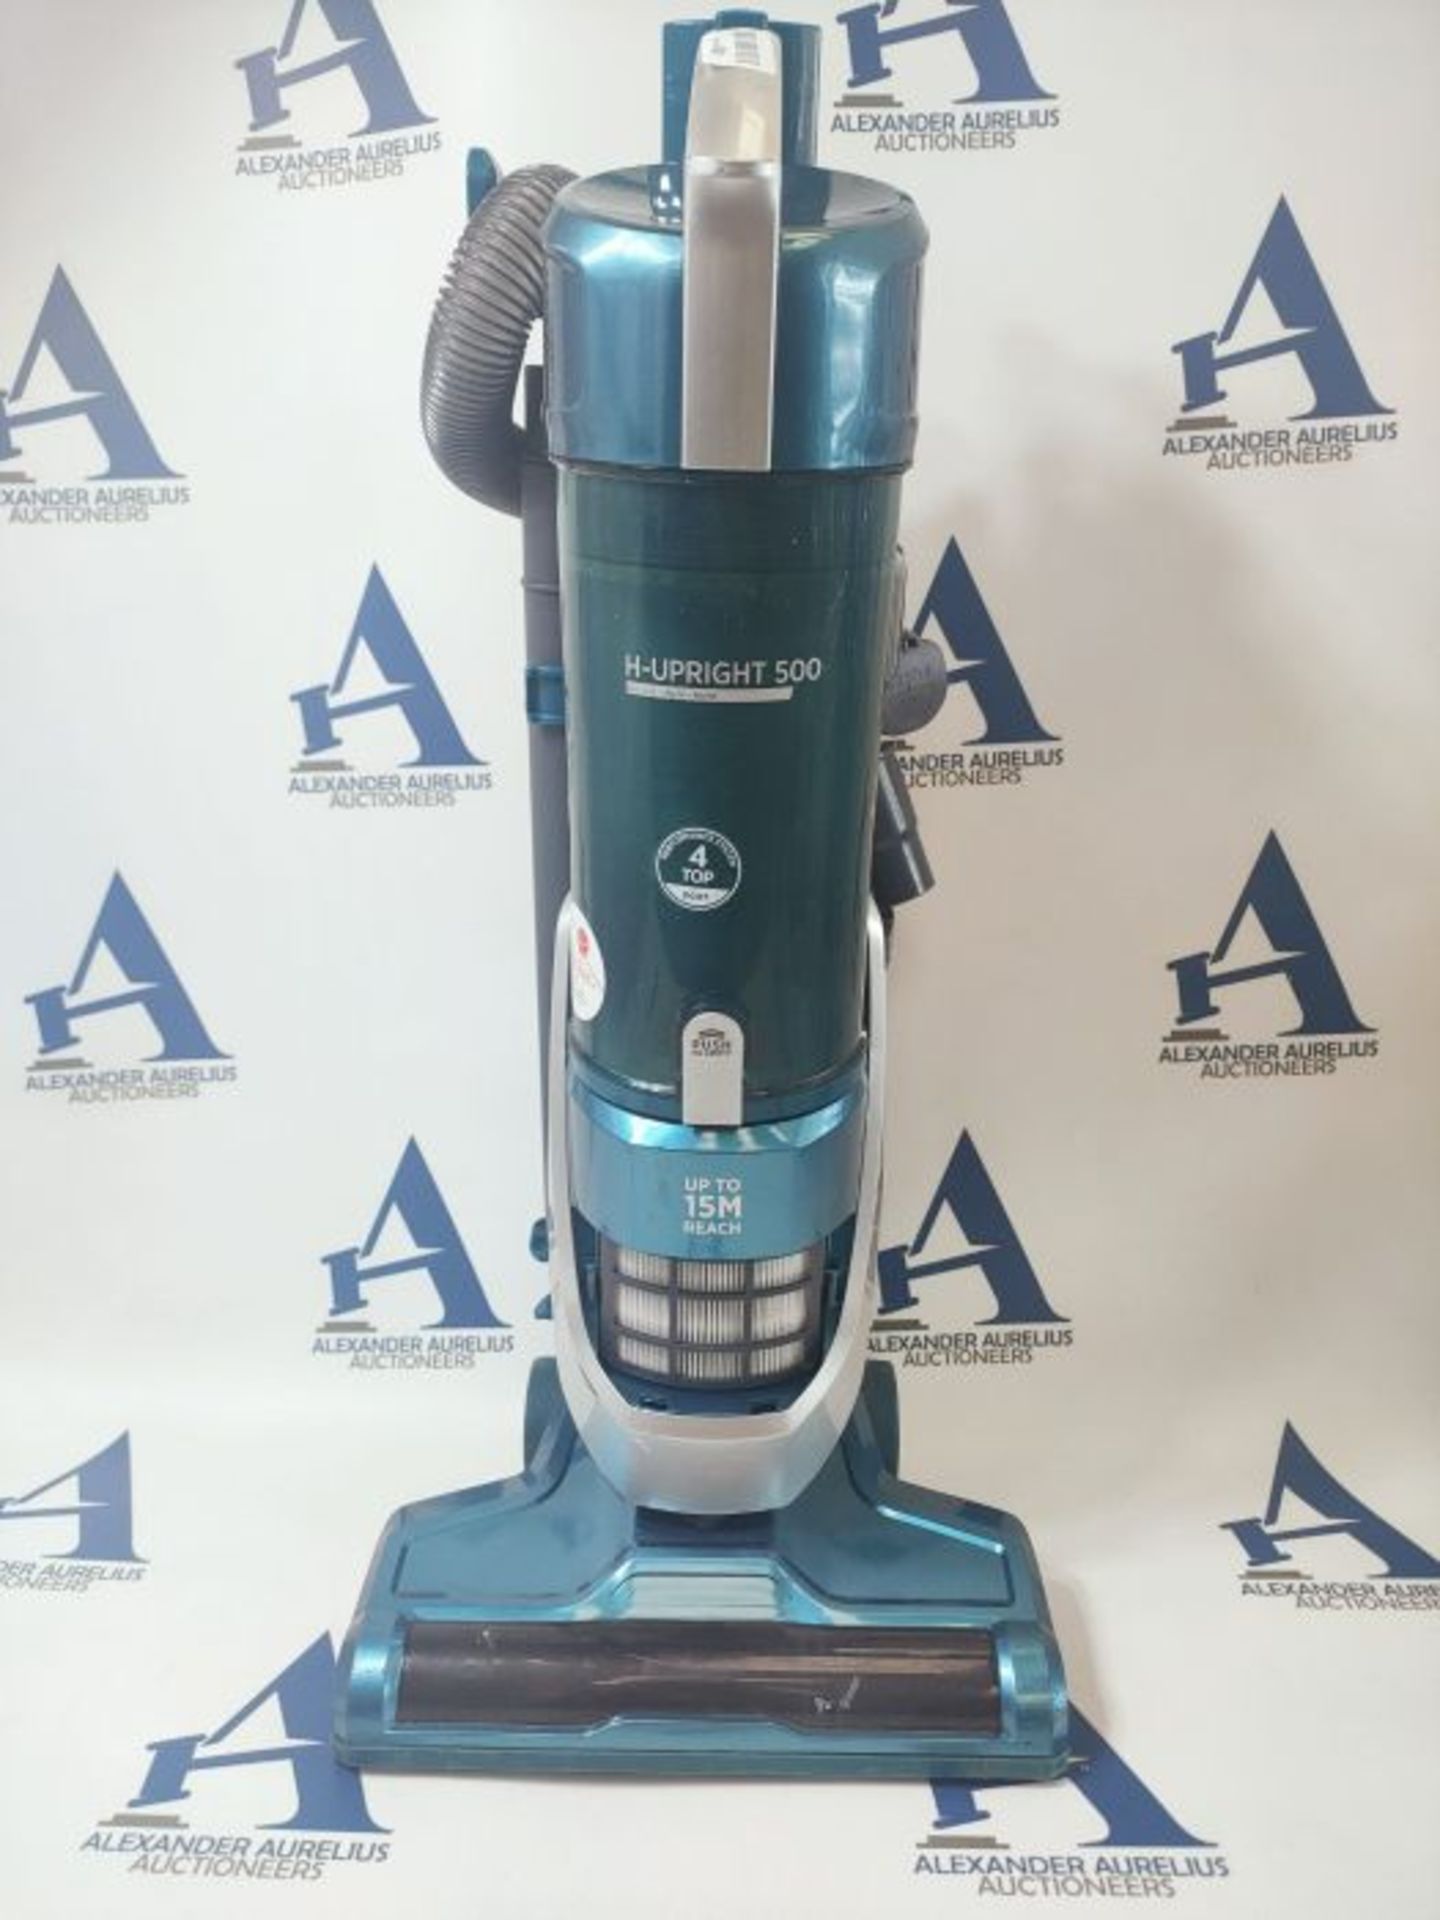 RRP £83.00 Hoover H-Upright 500 Reach HU500GHM Upright Vacuum Cleaner - Image 2 of 3